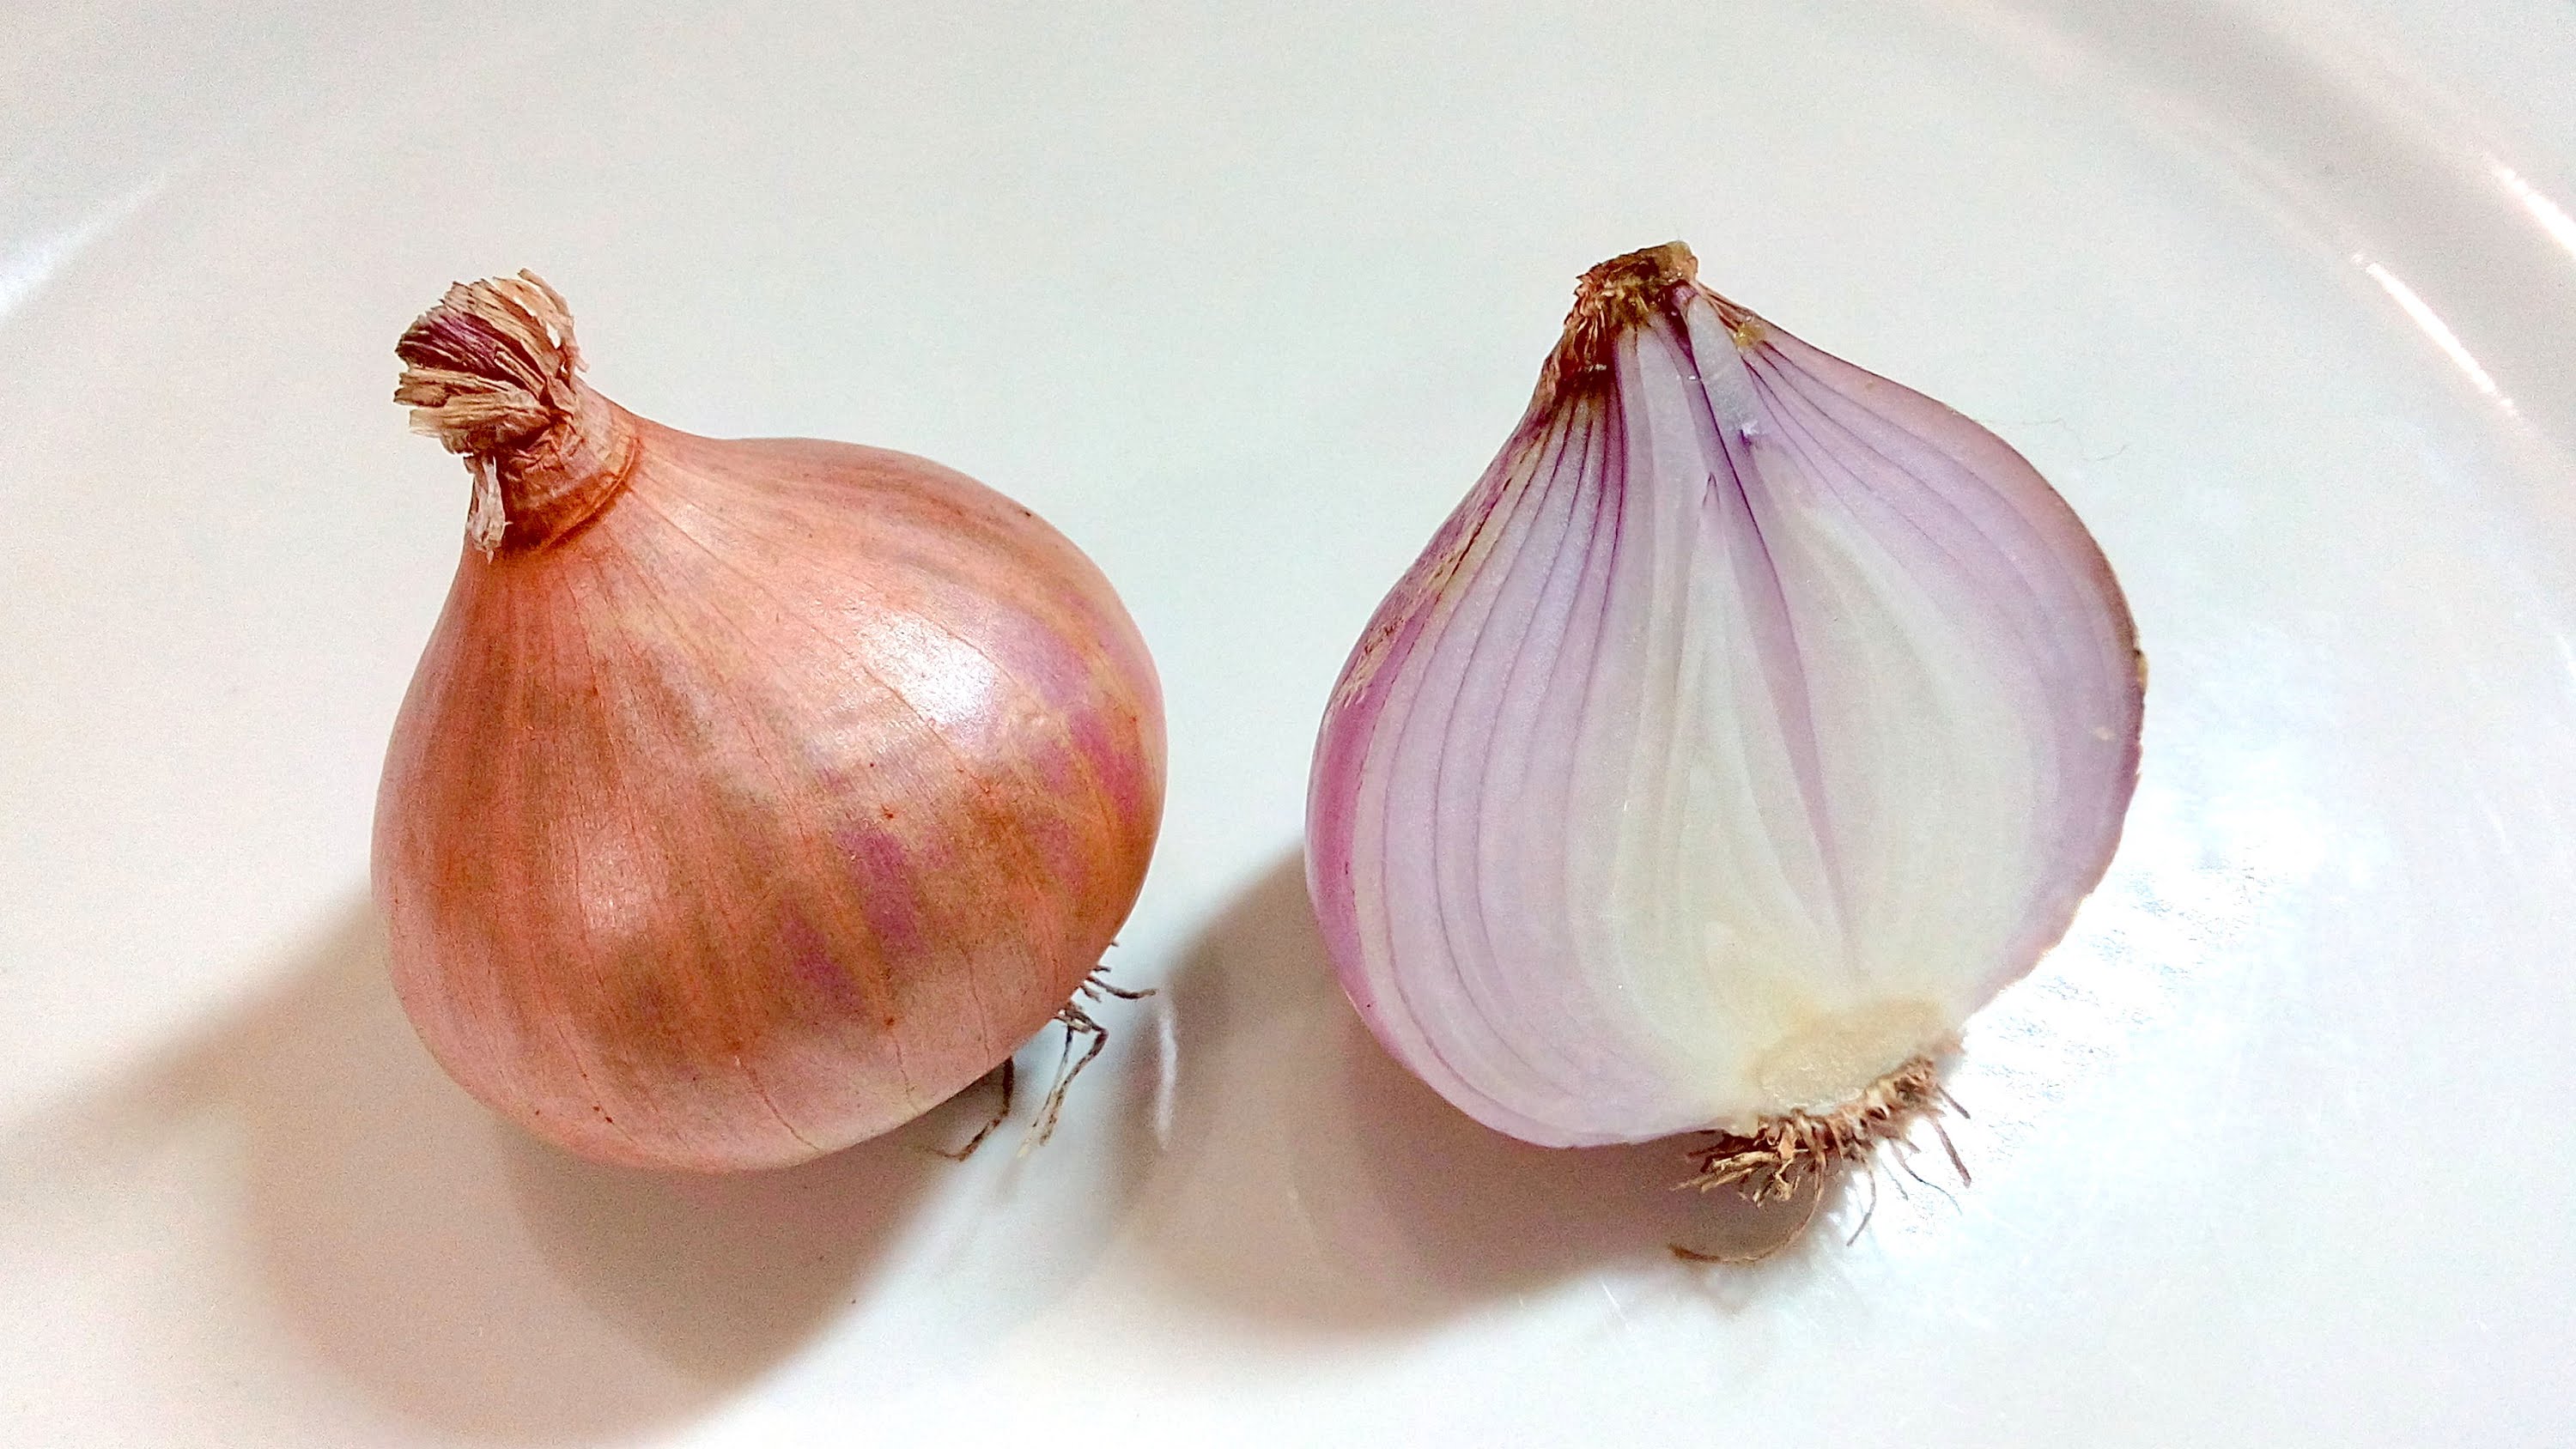 Top 10 Uses of Onion for Skin and Hair Care - YouTube